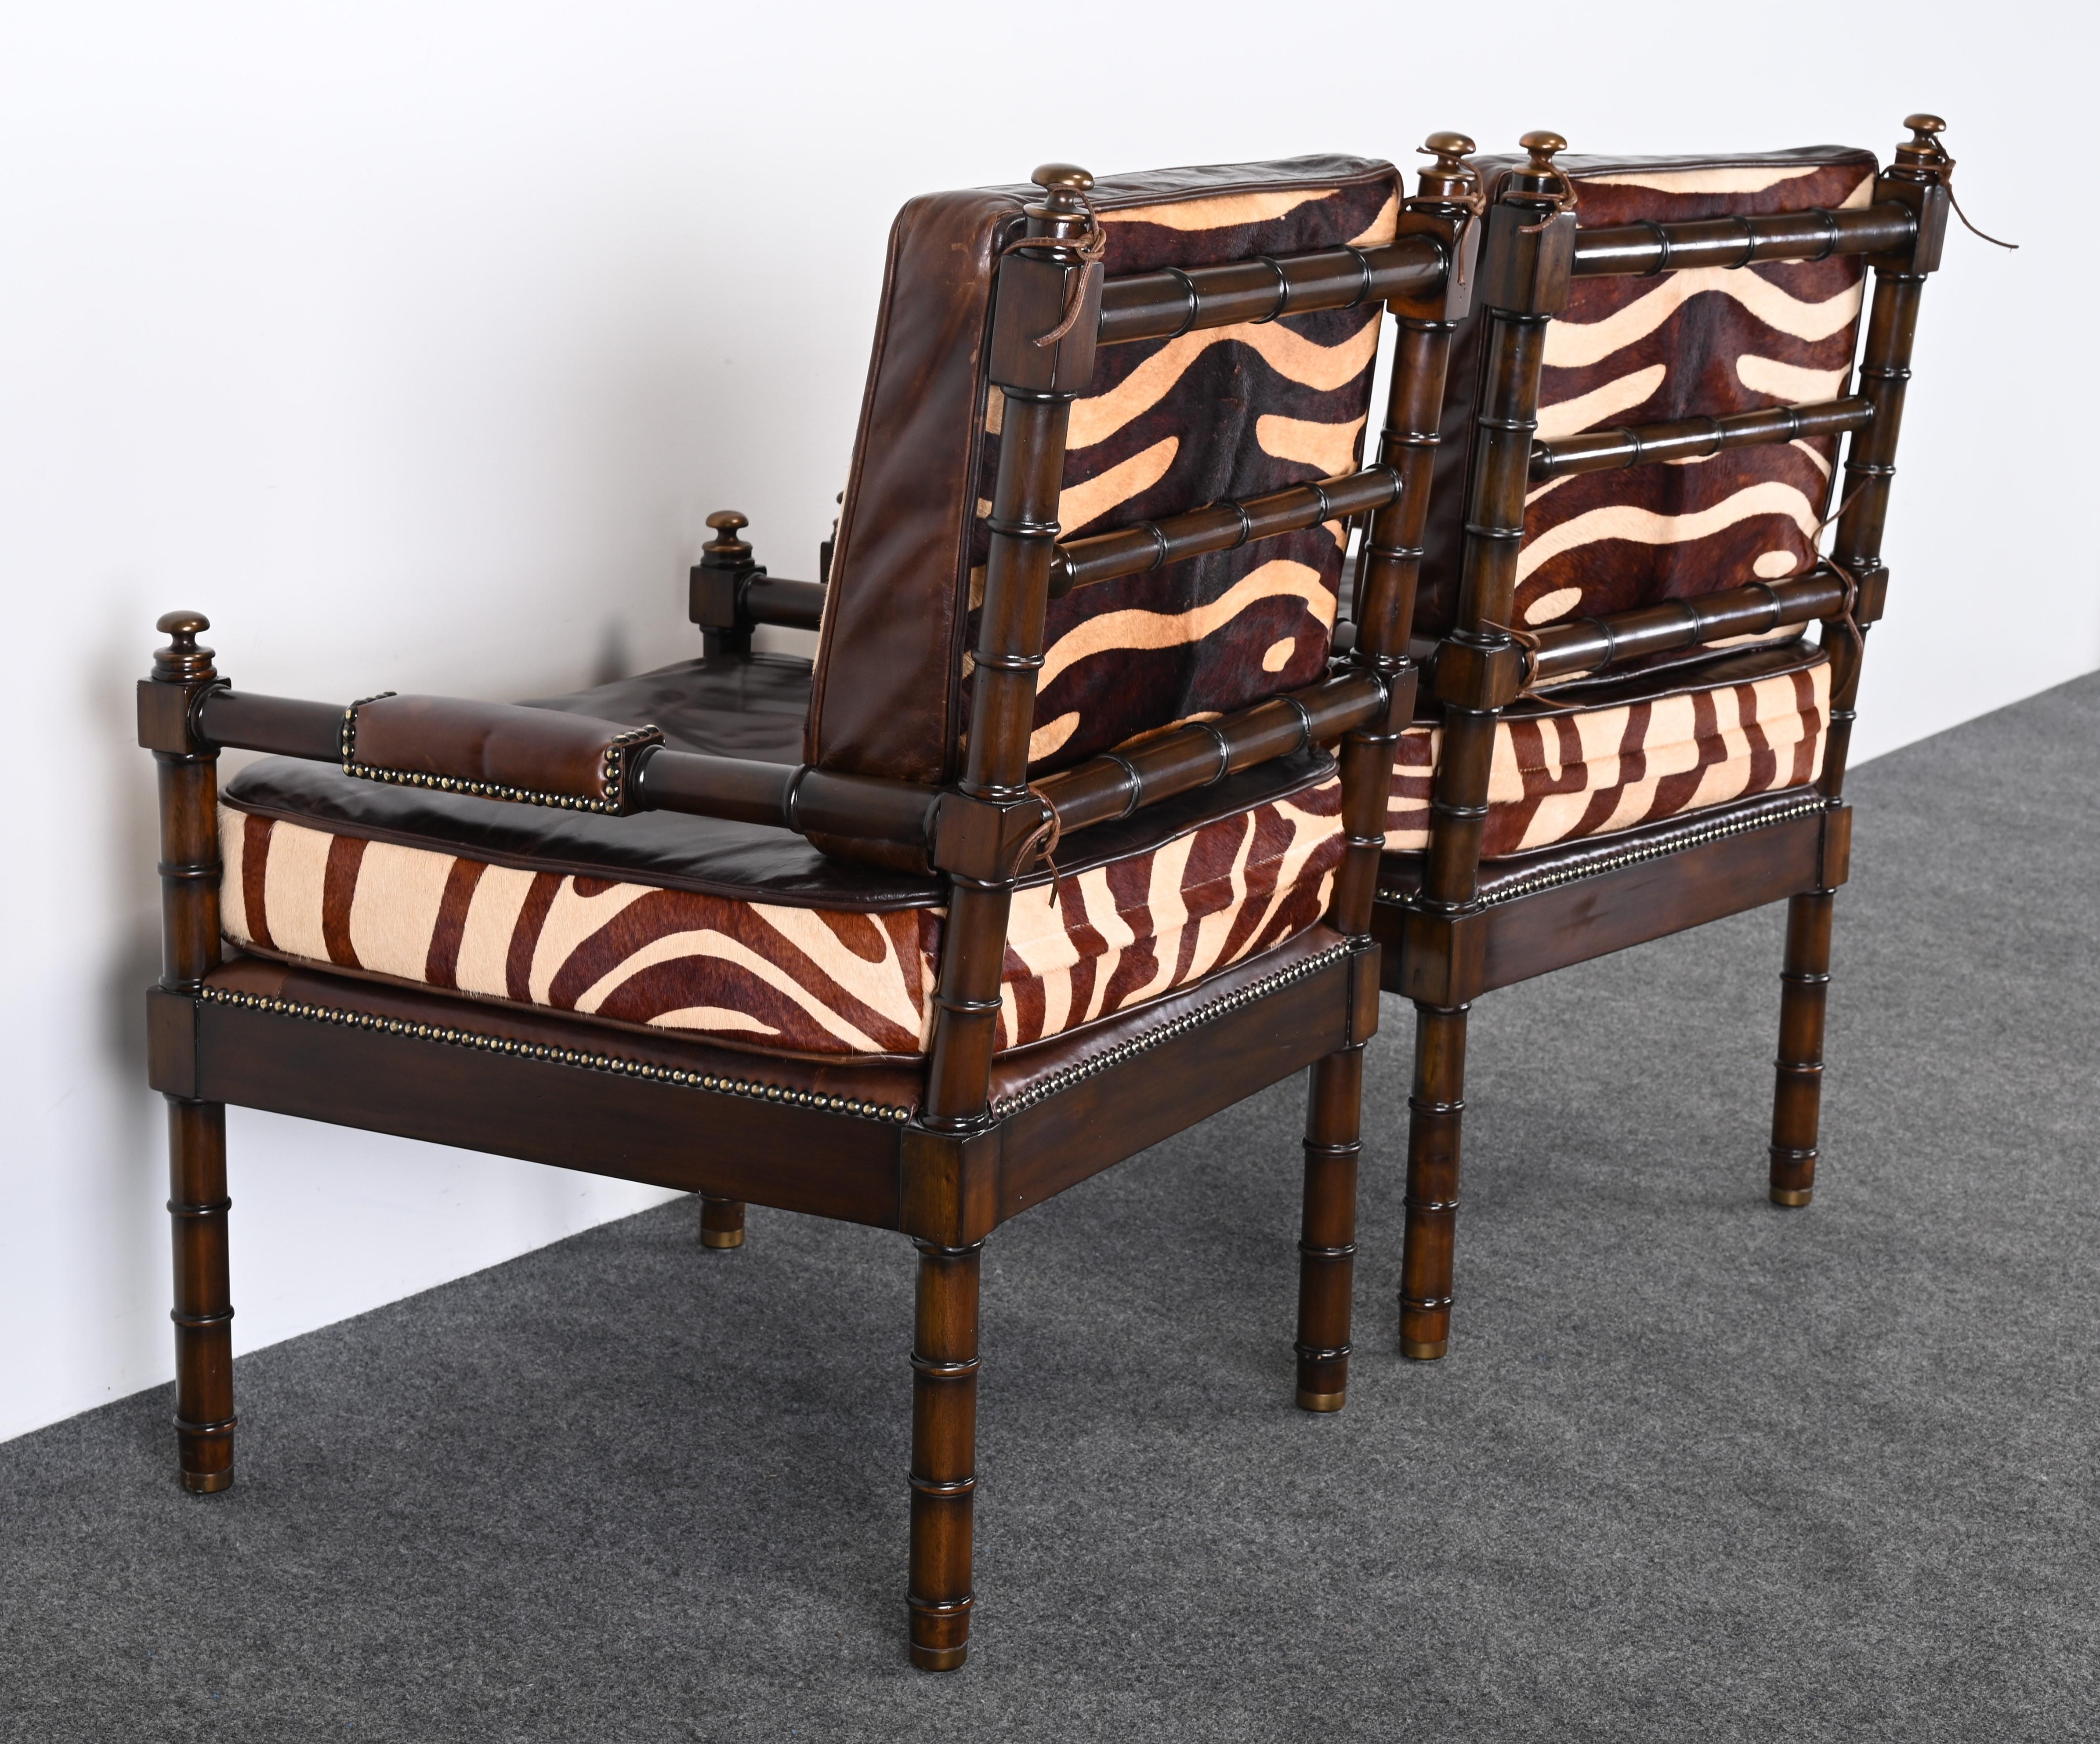 Maitland Smith Bamboo Armchairs with Cowhide Zebra Print Leather Seats, 1990s For Sale 6